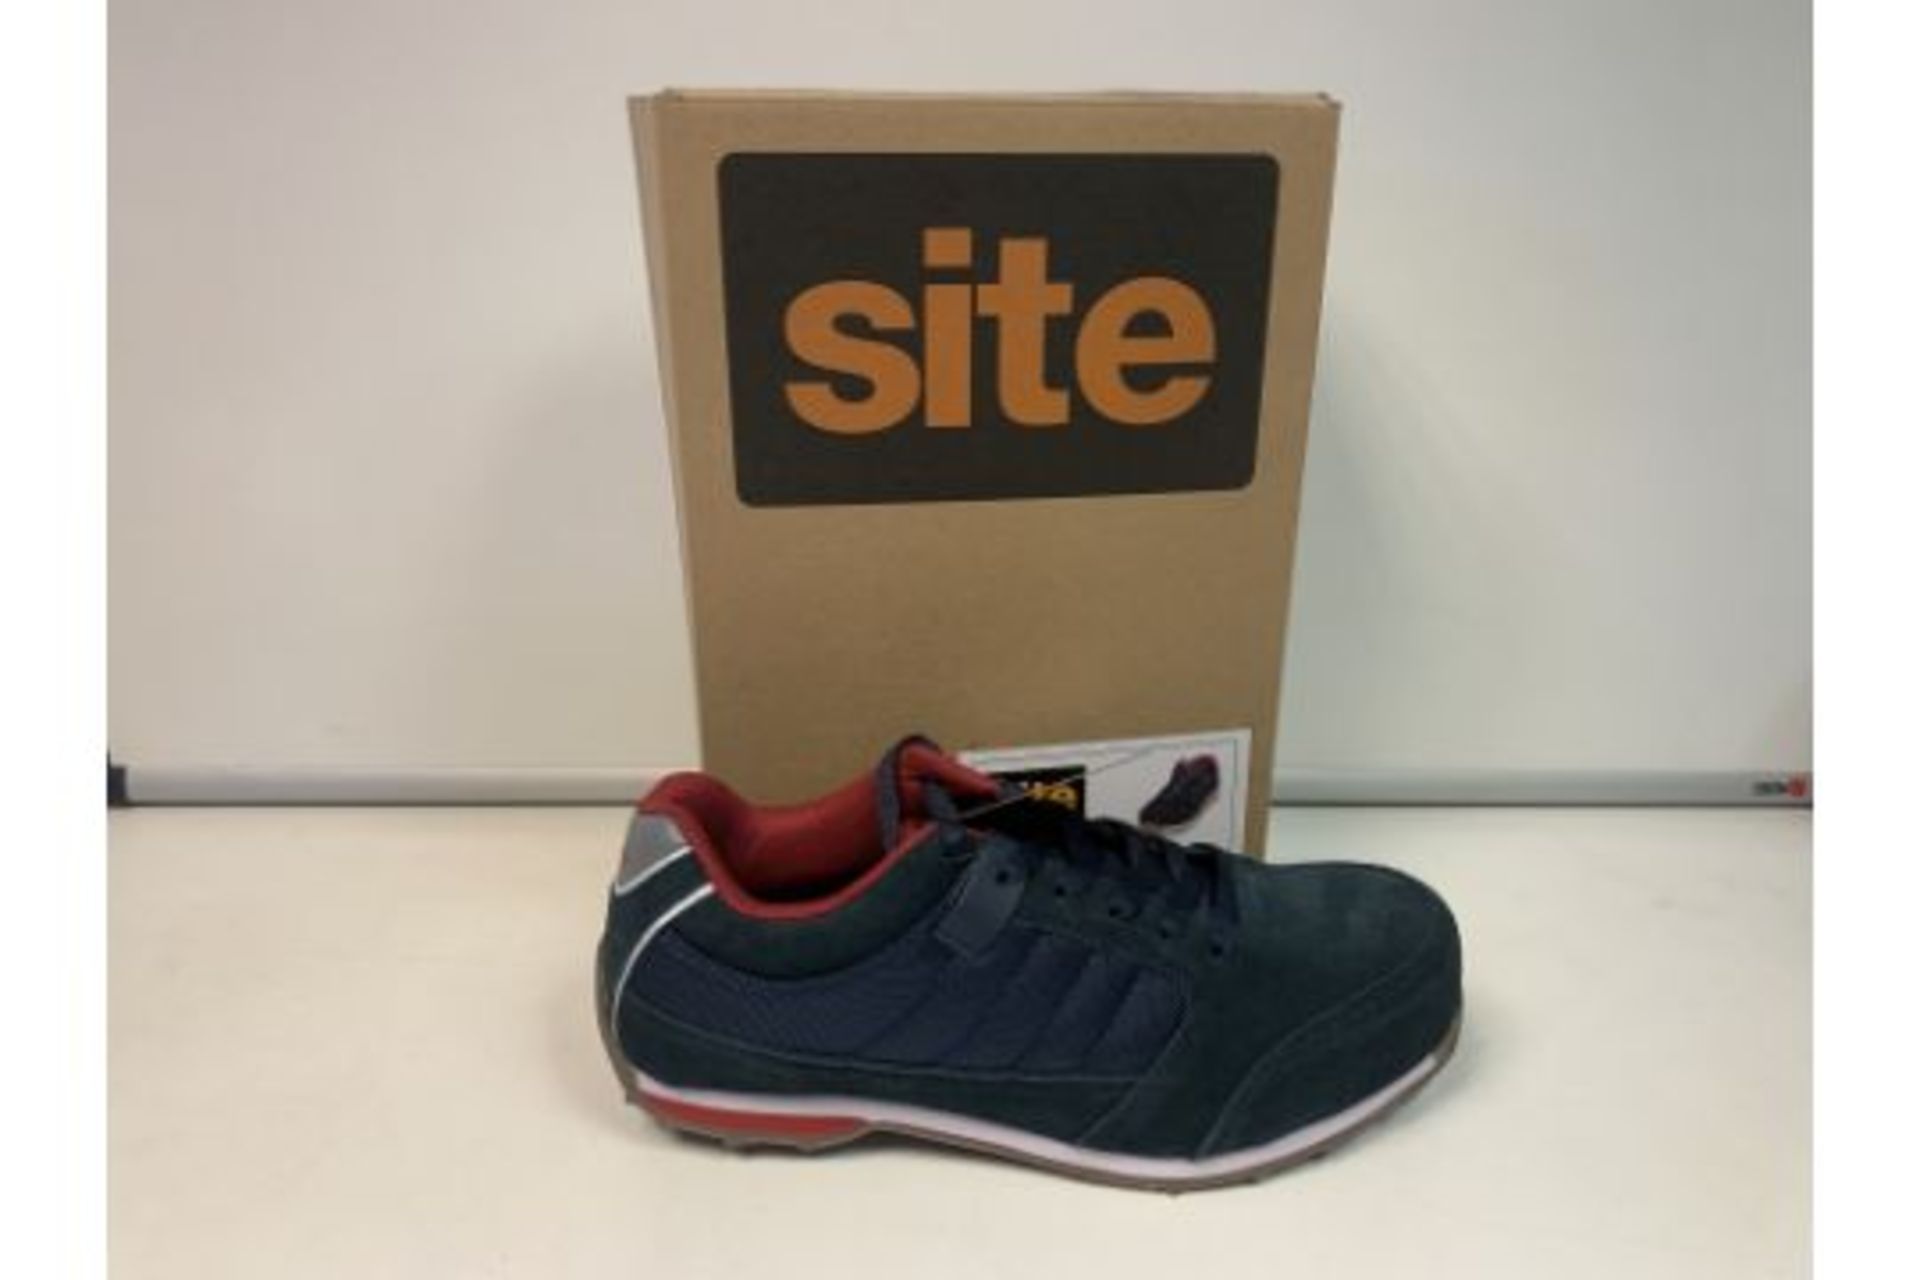 4 X NEW BOXED PAIRS OF STRETA SAFETY TRAINERS NAVY. SIZE 10. (ROW8) Suede leather and mesh upper.